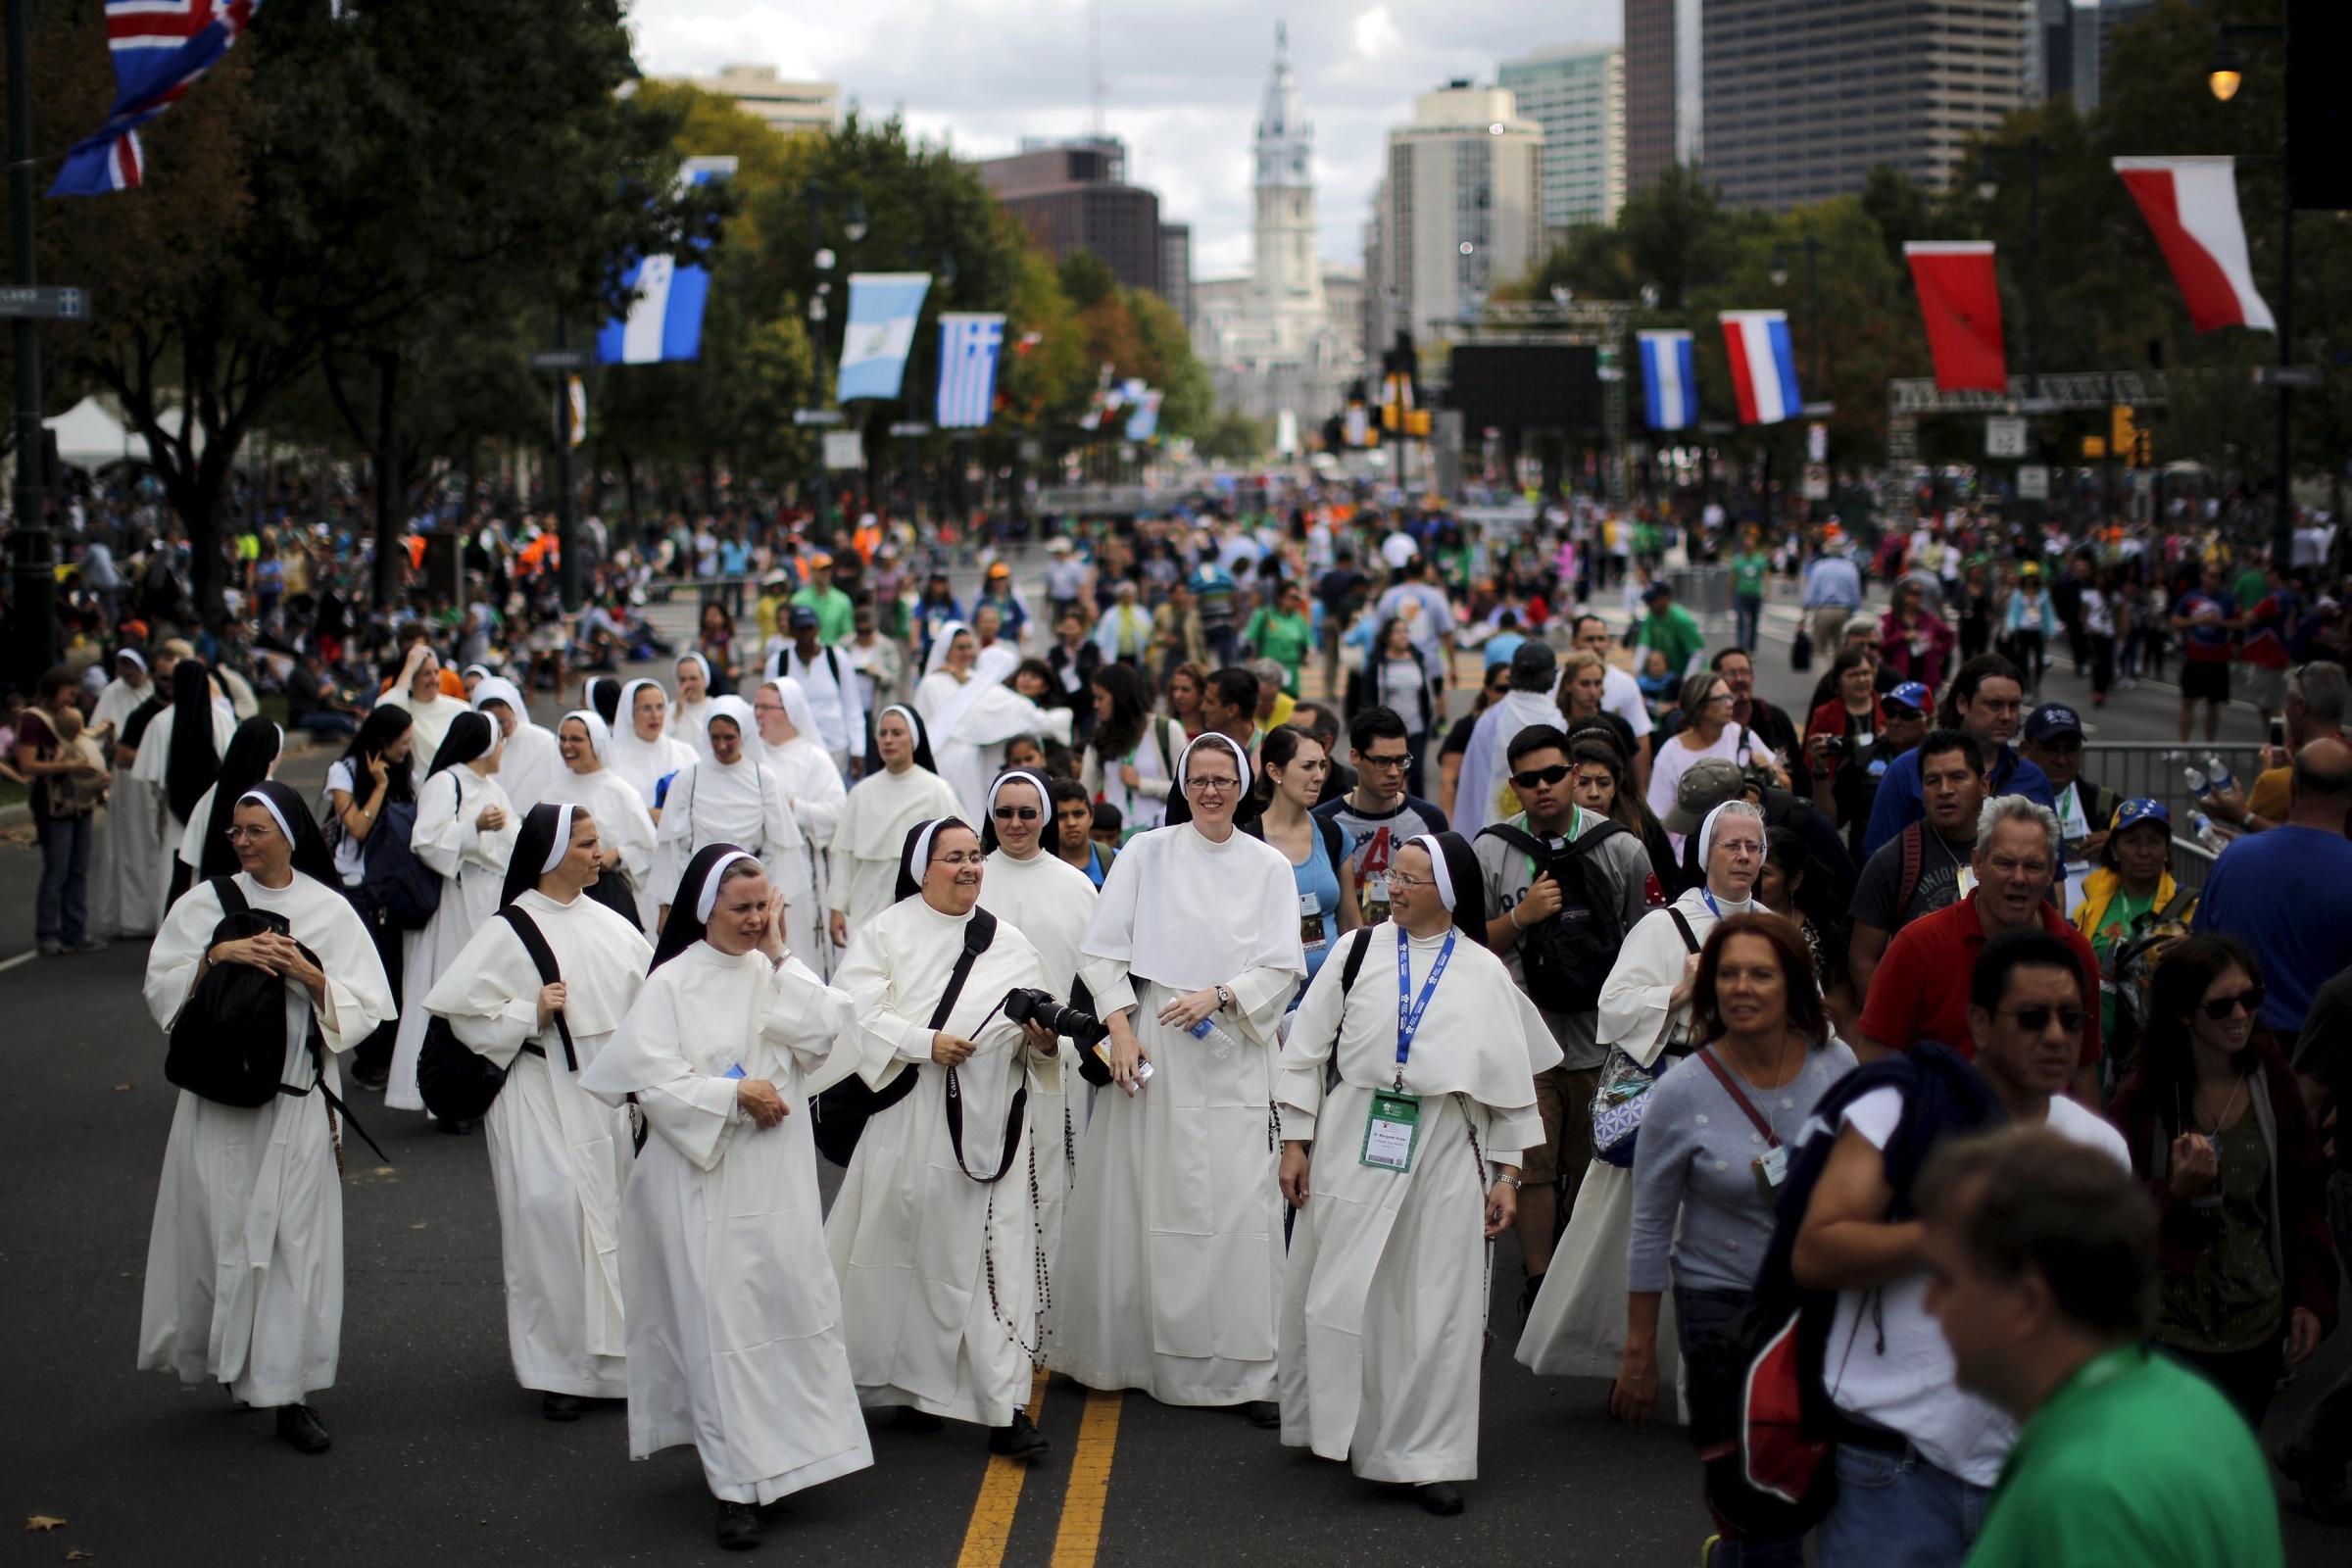 Nuns wait for Pope Francis' arrival at the Festival of Families rally along Benjamin Franklin Parkway in Philadelphia, Pennsylvania